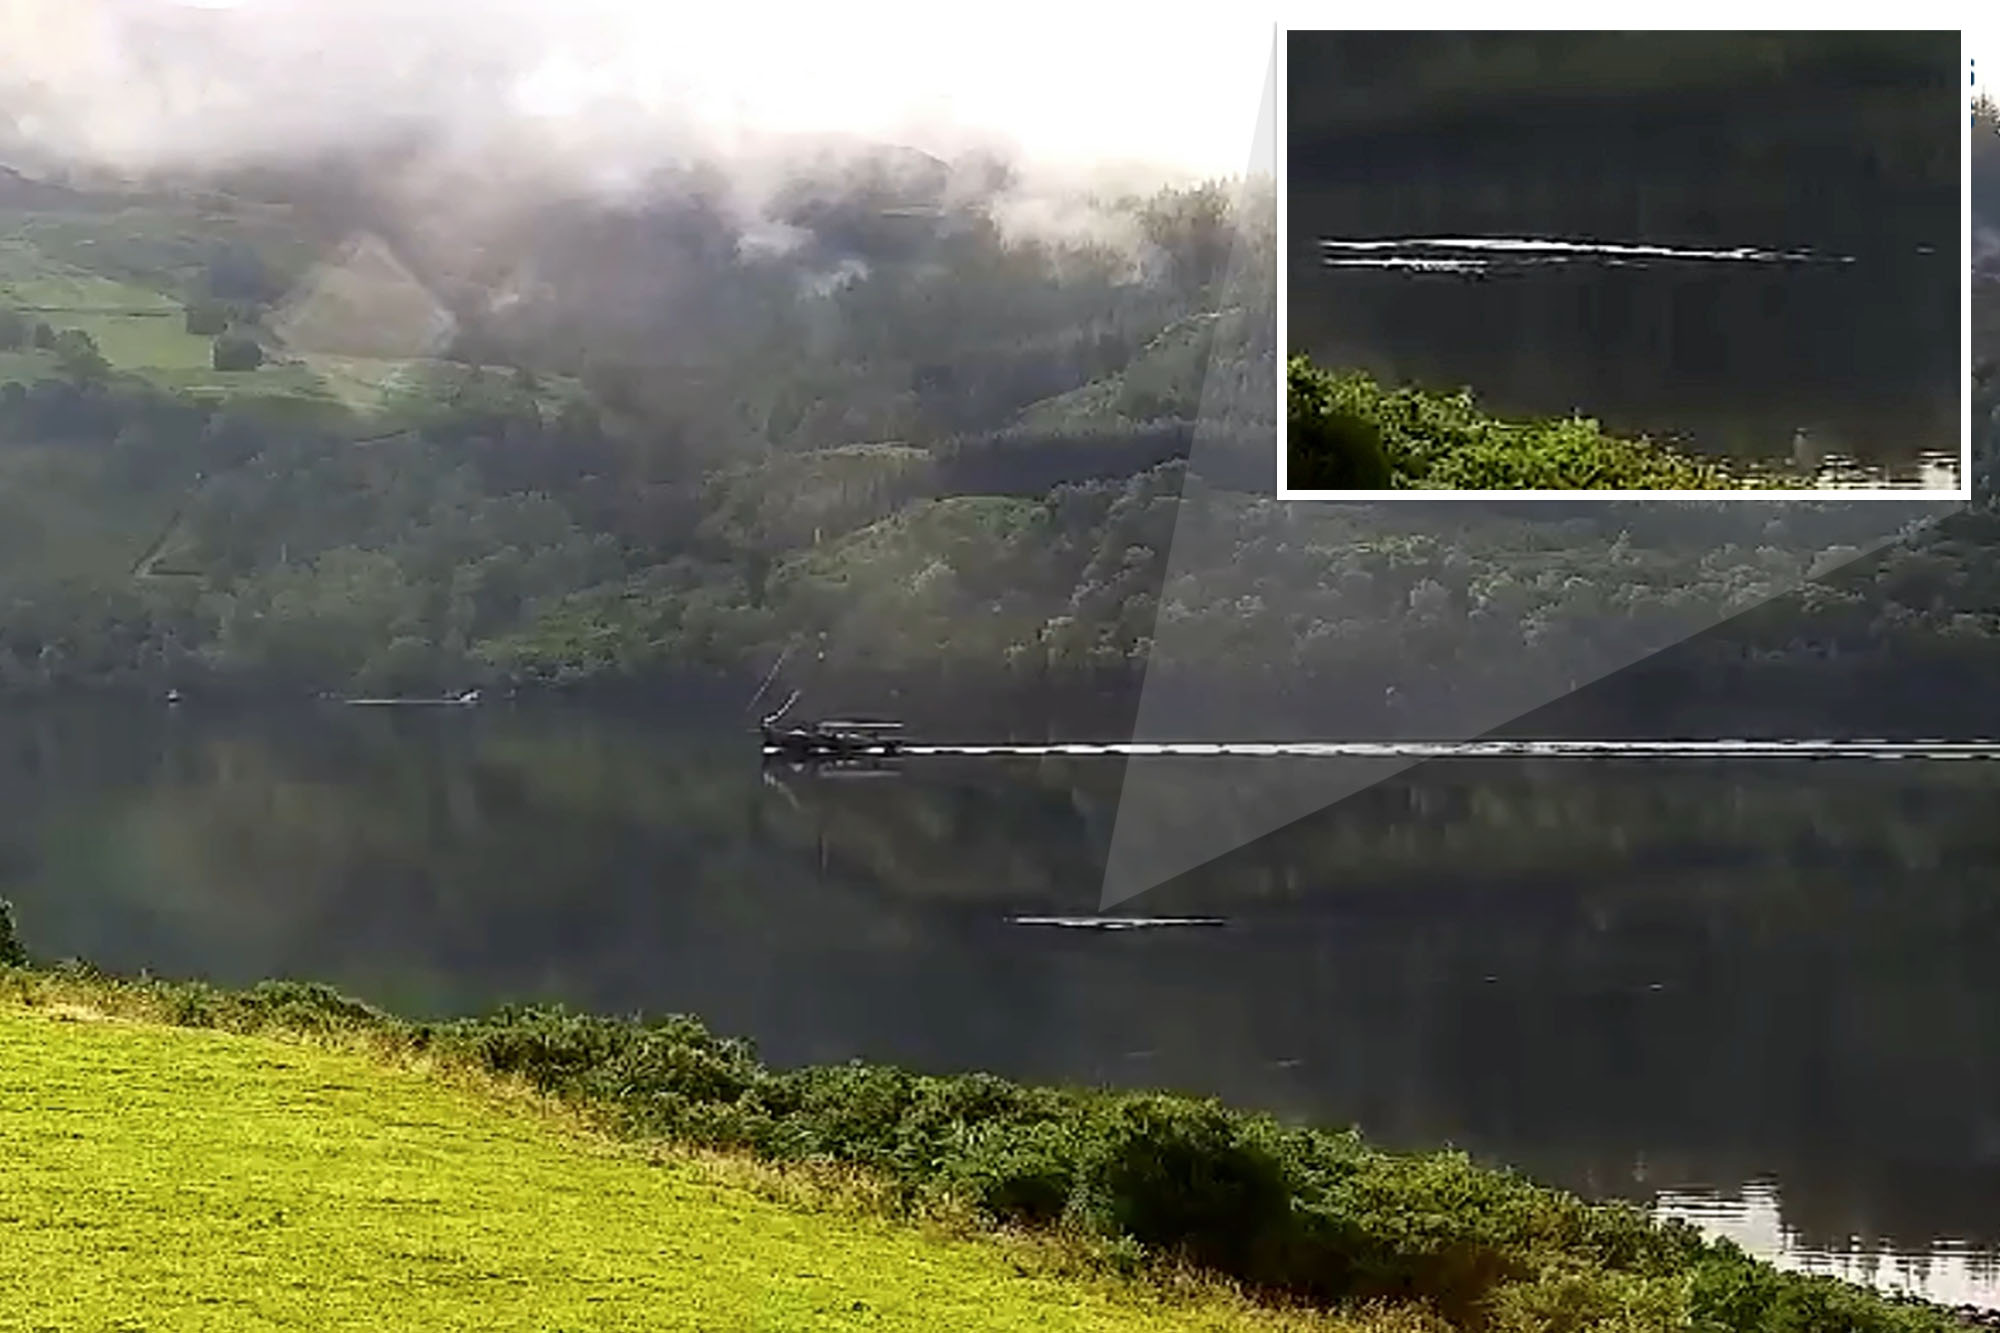 Loch Ness Monster sleuth claims he ‘won the lottery’ with recent footage